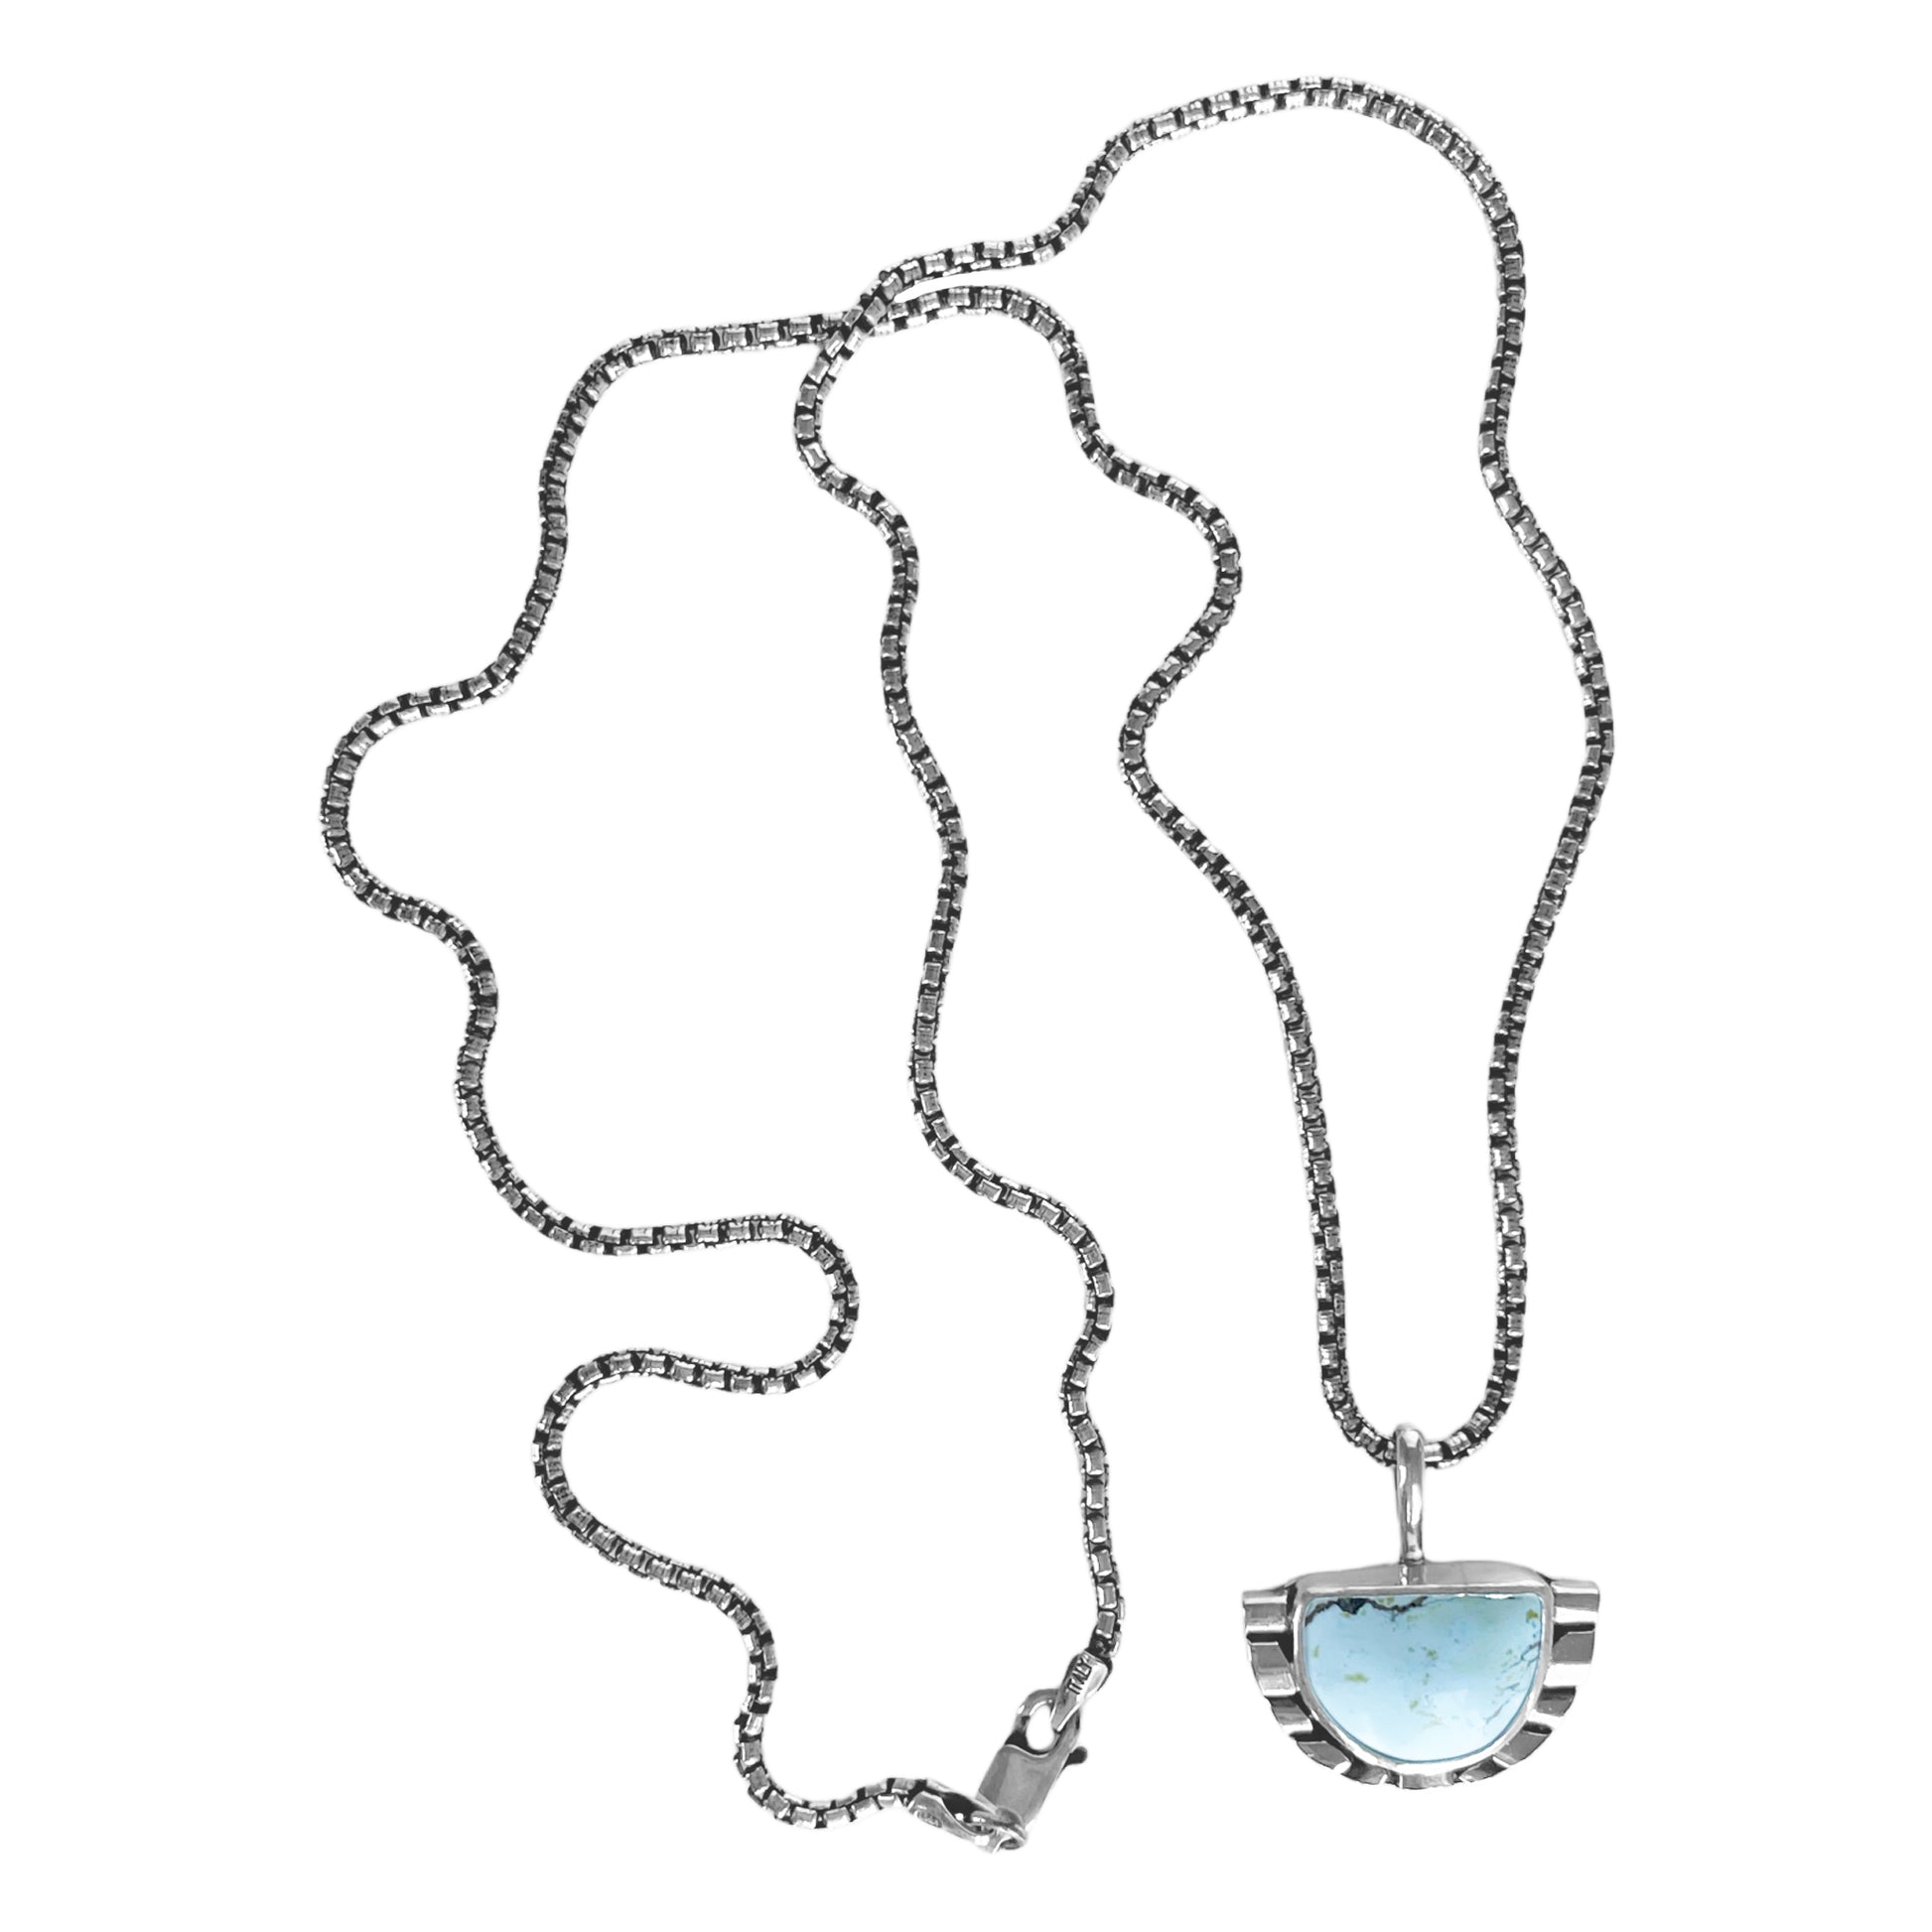 Half moon pale blue turquoise pendant necklace featuring hand-shaped silver moonbeams accenting the curves of the stone on a sterling silver rounded box chain.